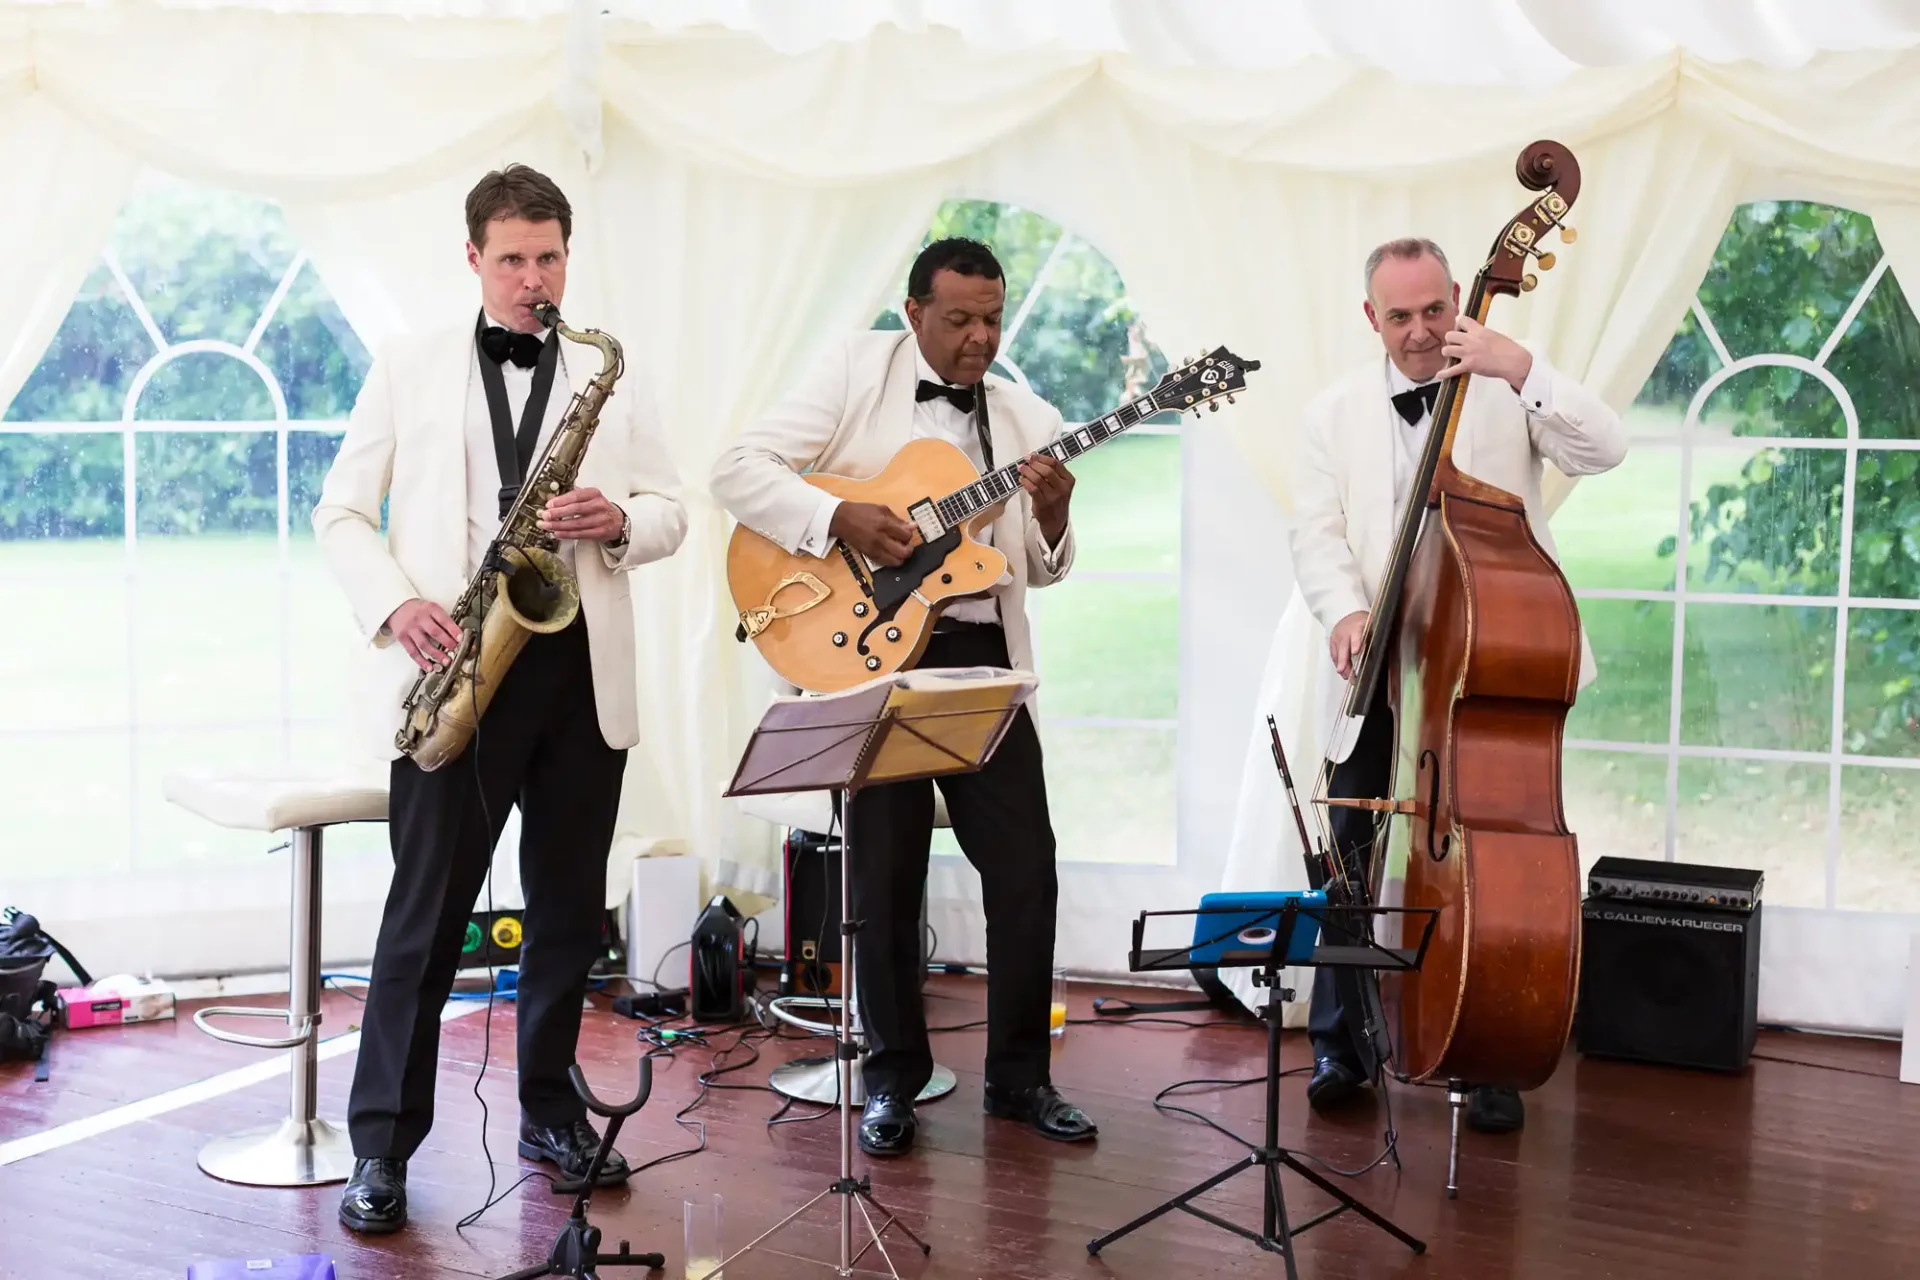 Three musicians perform at an event, playing saxophone, electric guitar, and double bass inside a tent.